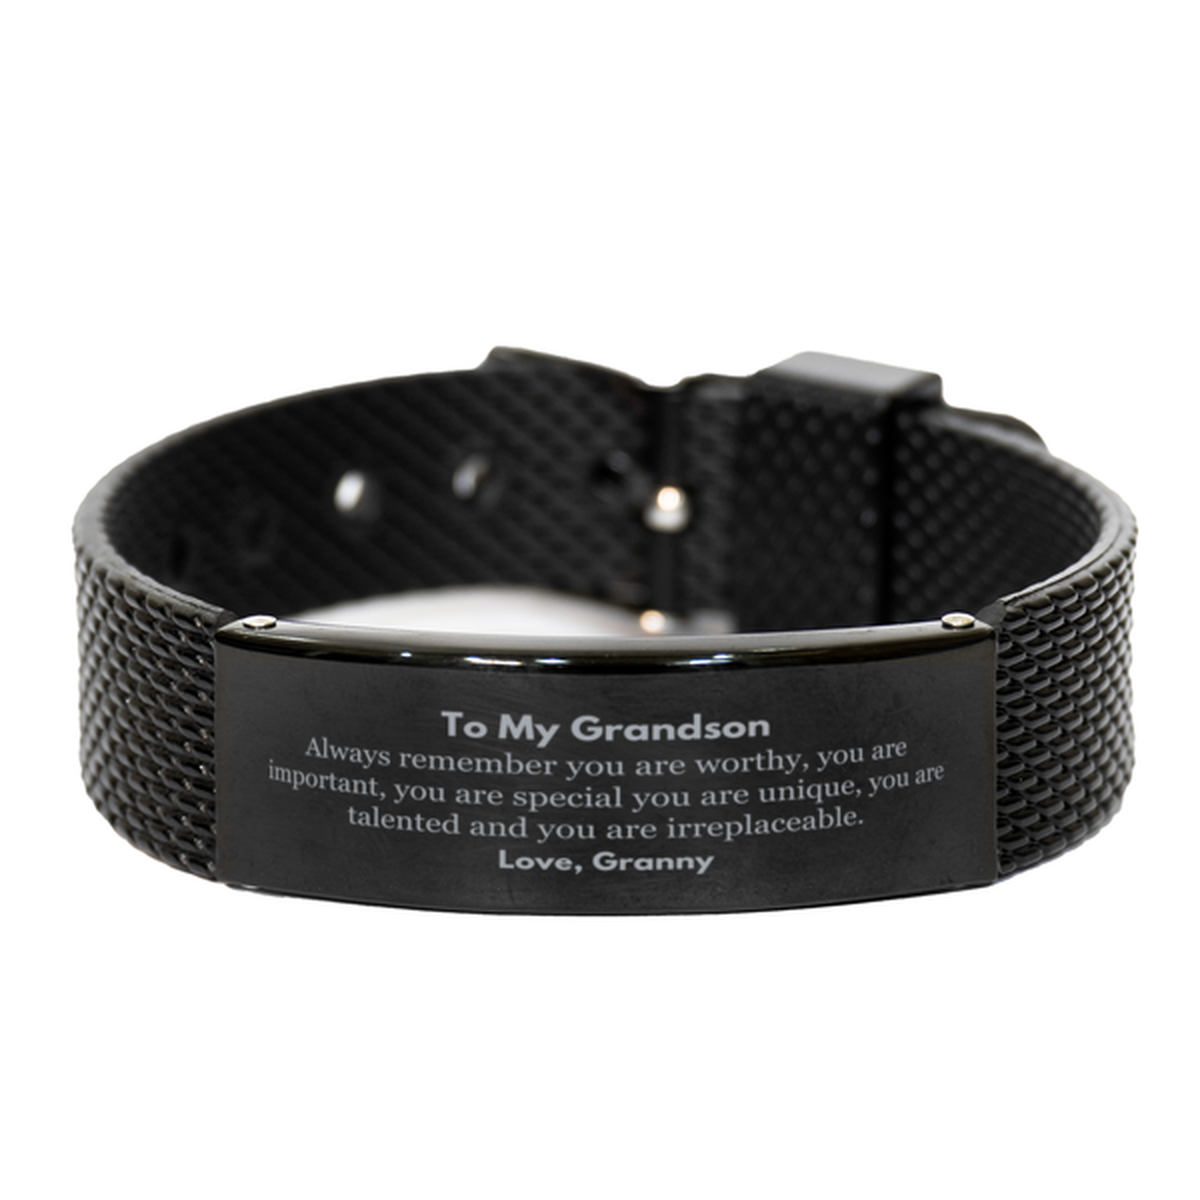 Grandson Birthday Gifts from Granny, Inspirational Black Shark Mesh Bracelet for Grandson Christmas Graduation Gifts for Grandson Always remember you are worthy, you are important. Love, Granny